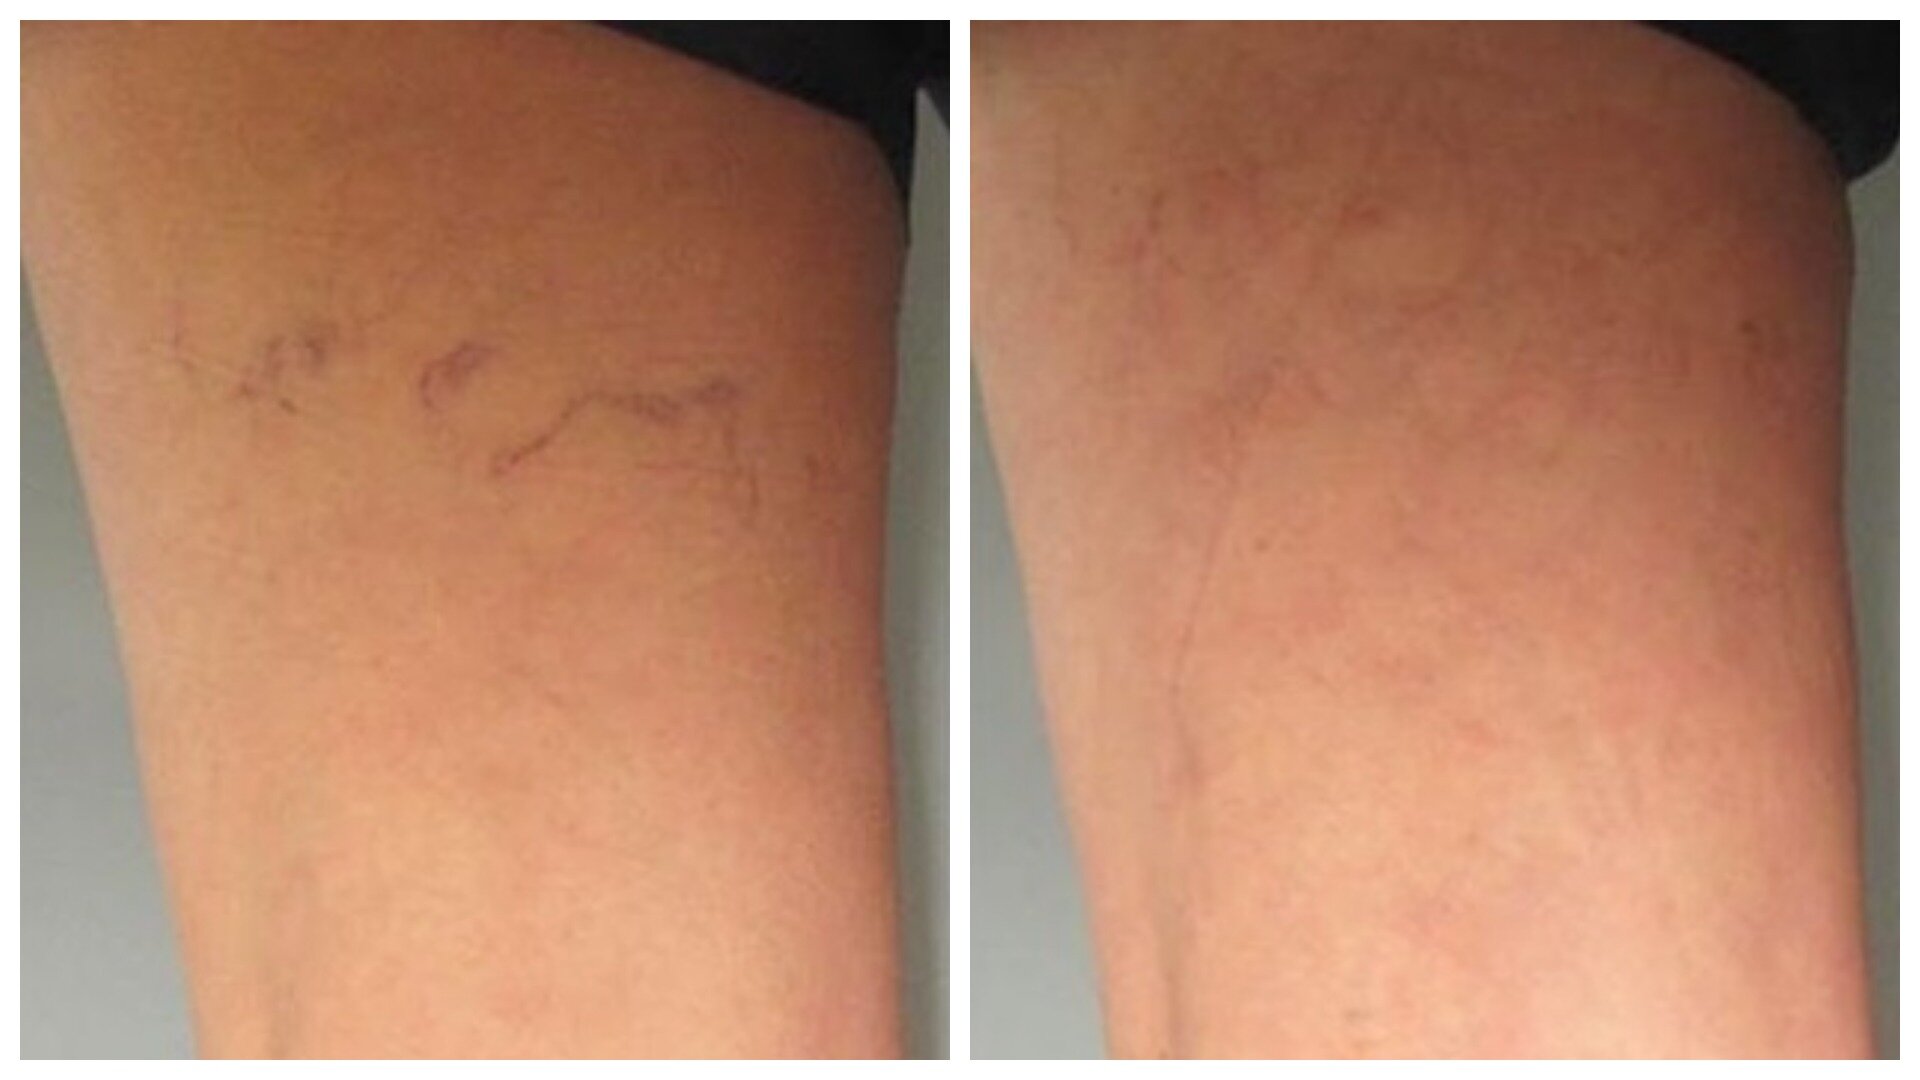 Thread vein removal back of upper thigh